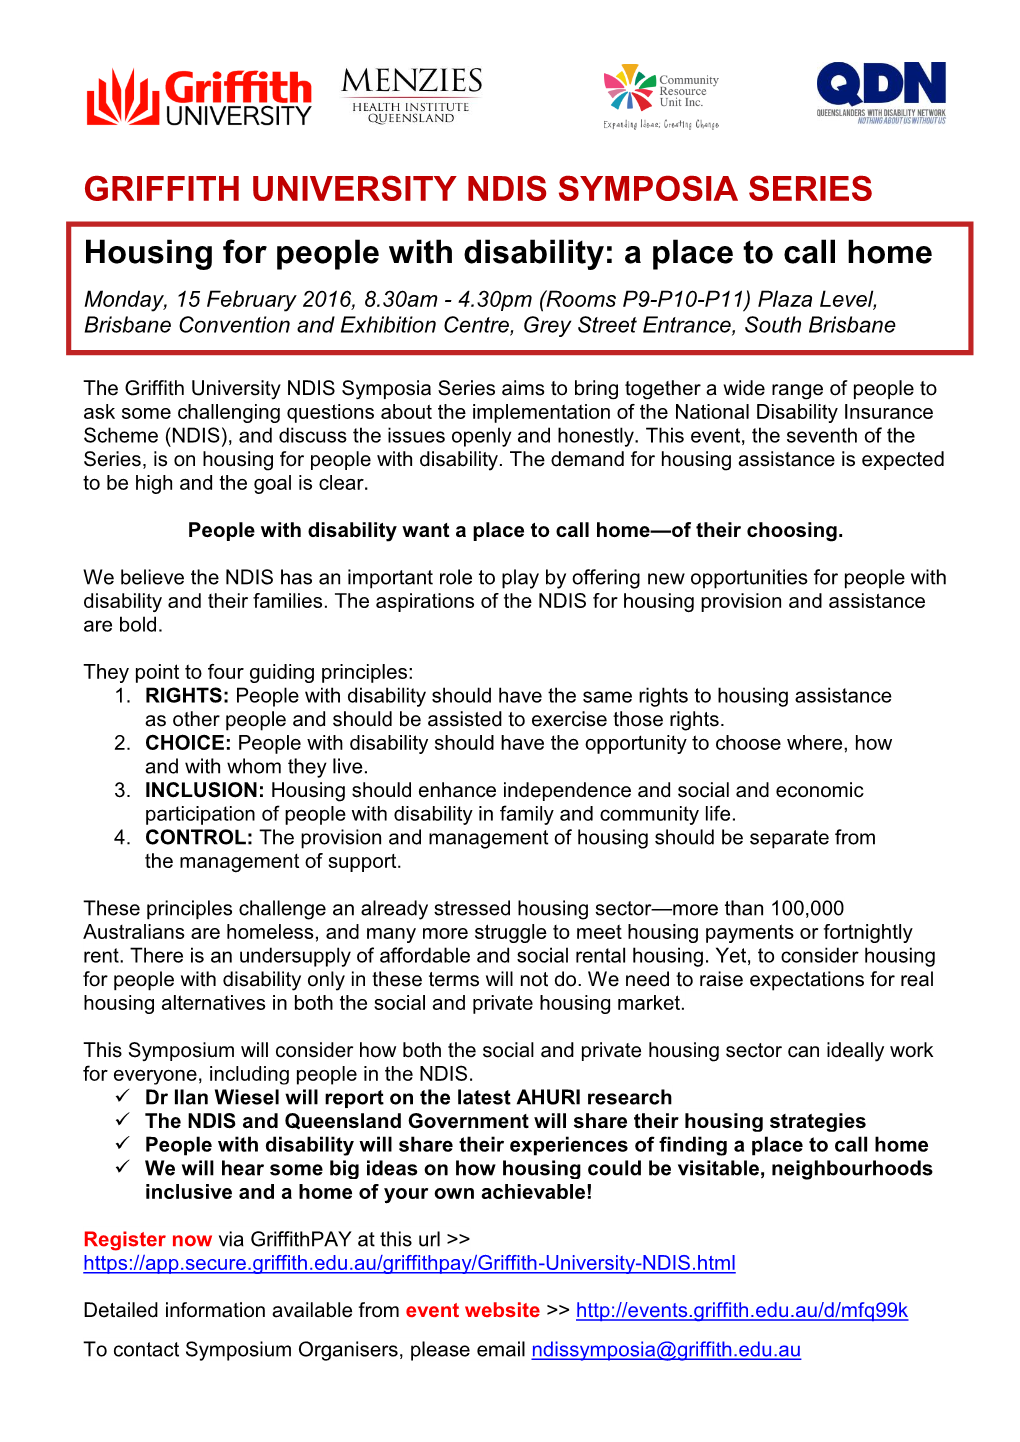 GRIFFITH UNIVERSITY NDIS SYMPOSIA SERIES Housing for People with Disability: a Place to Call Home